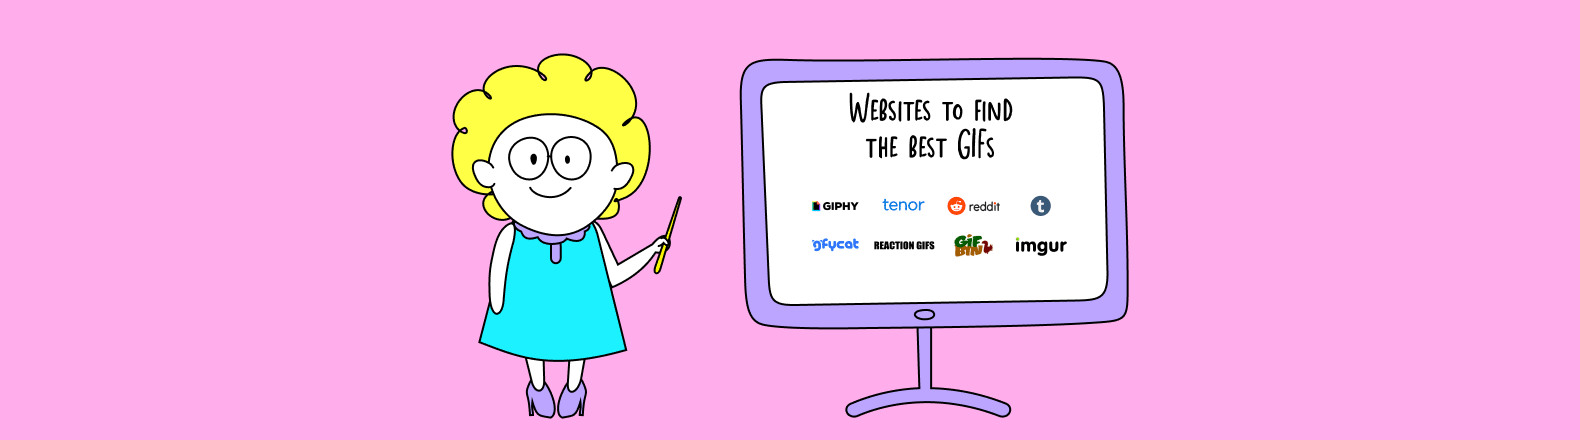 13 Websites to Find the Best GIFs